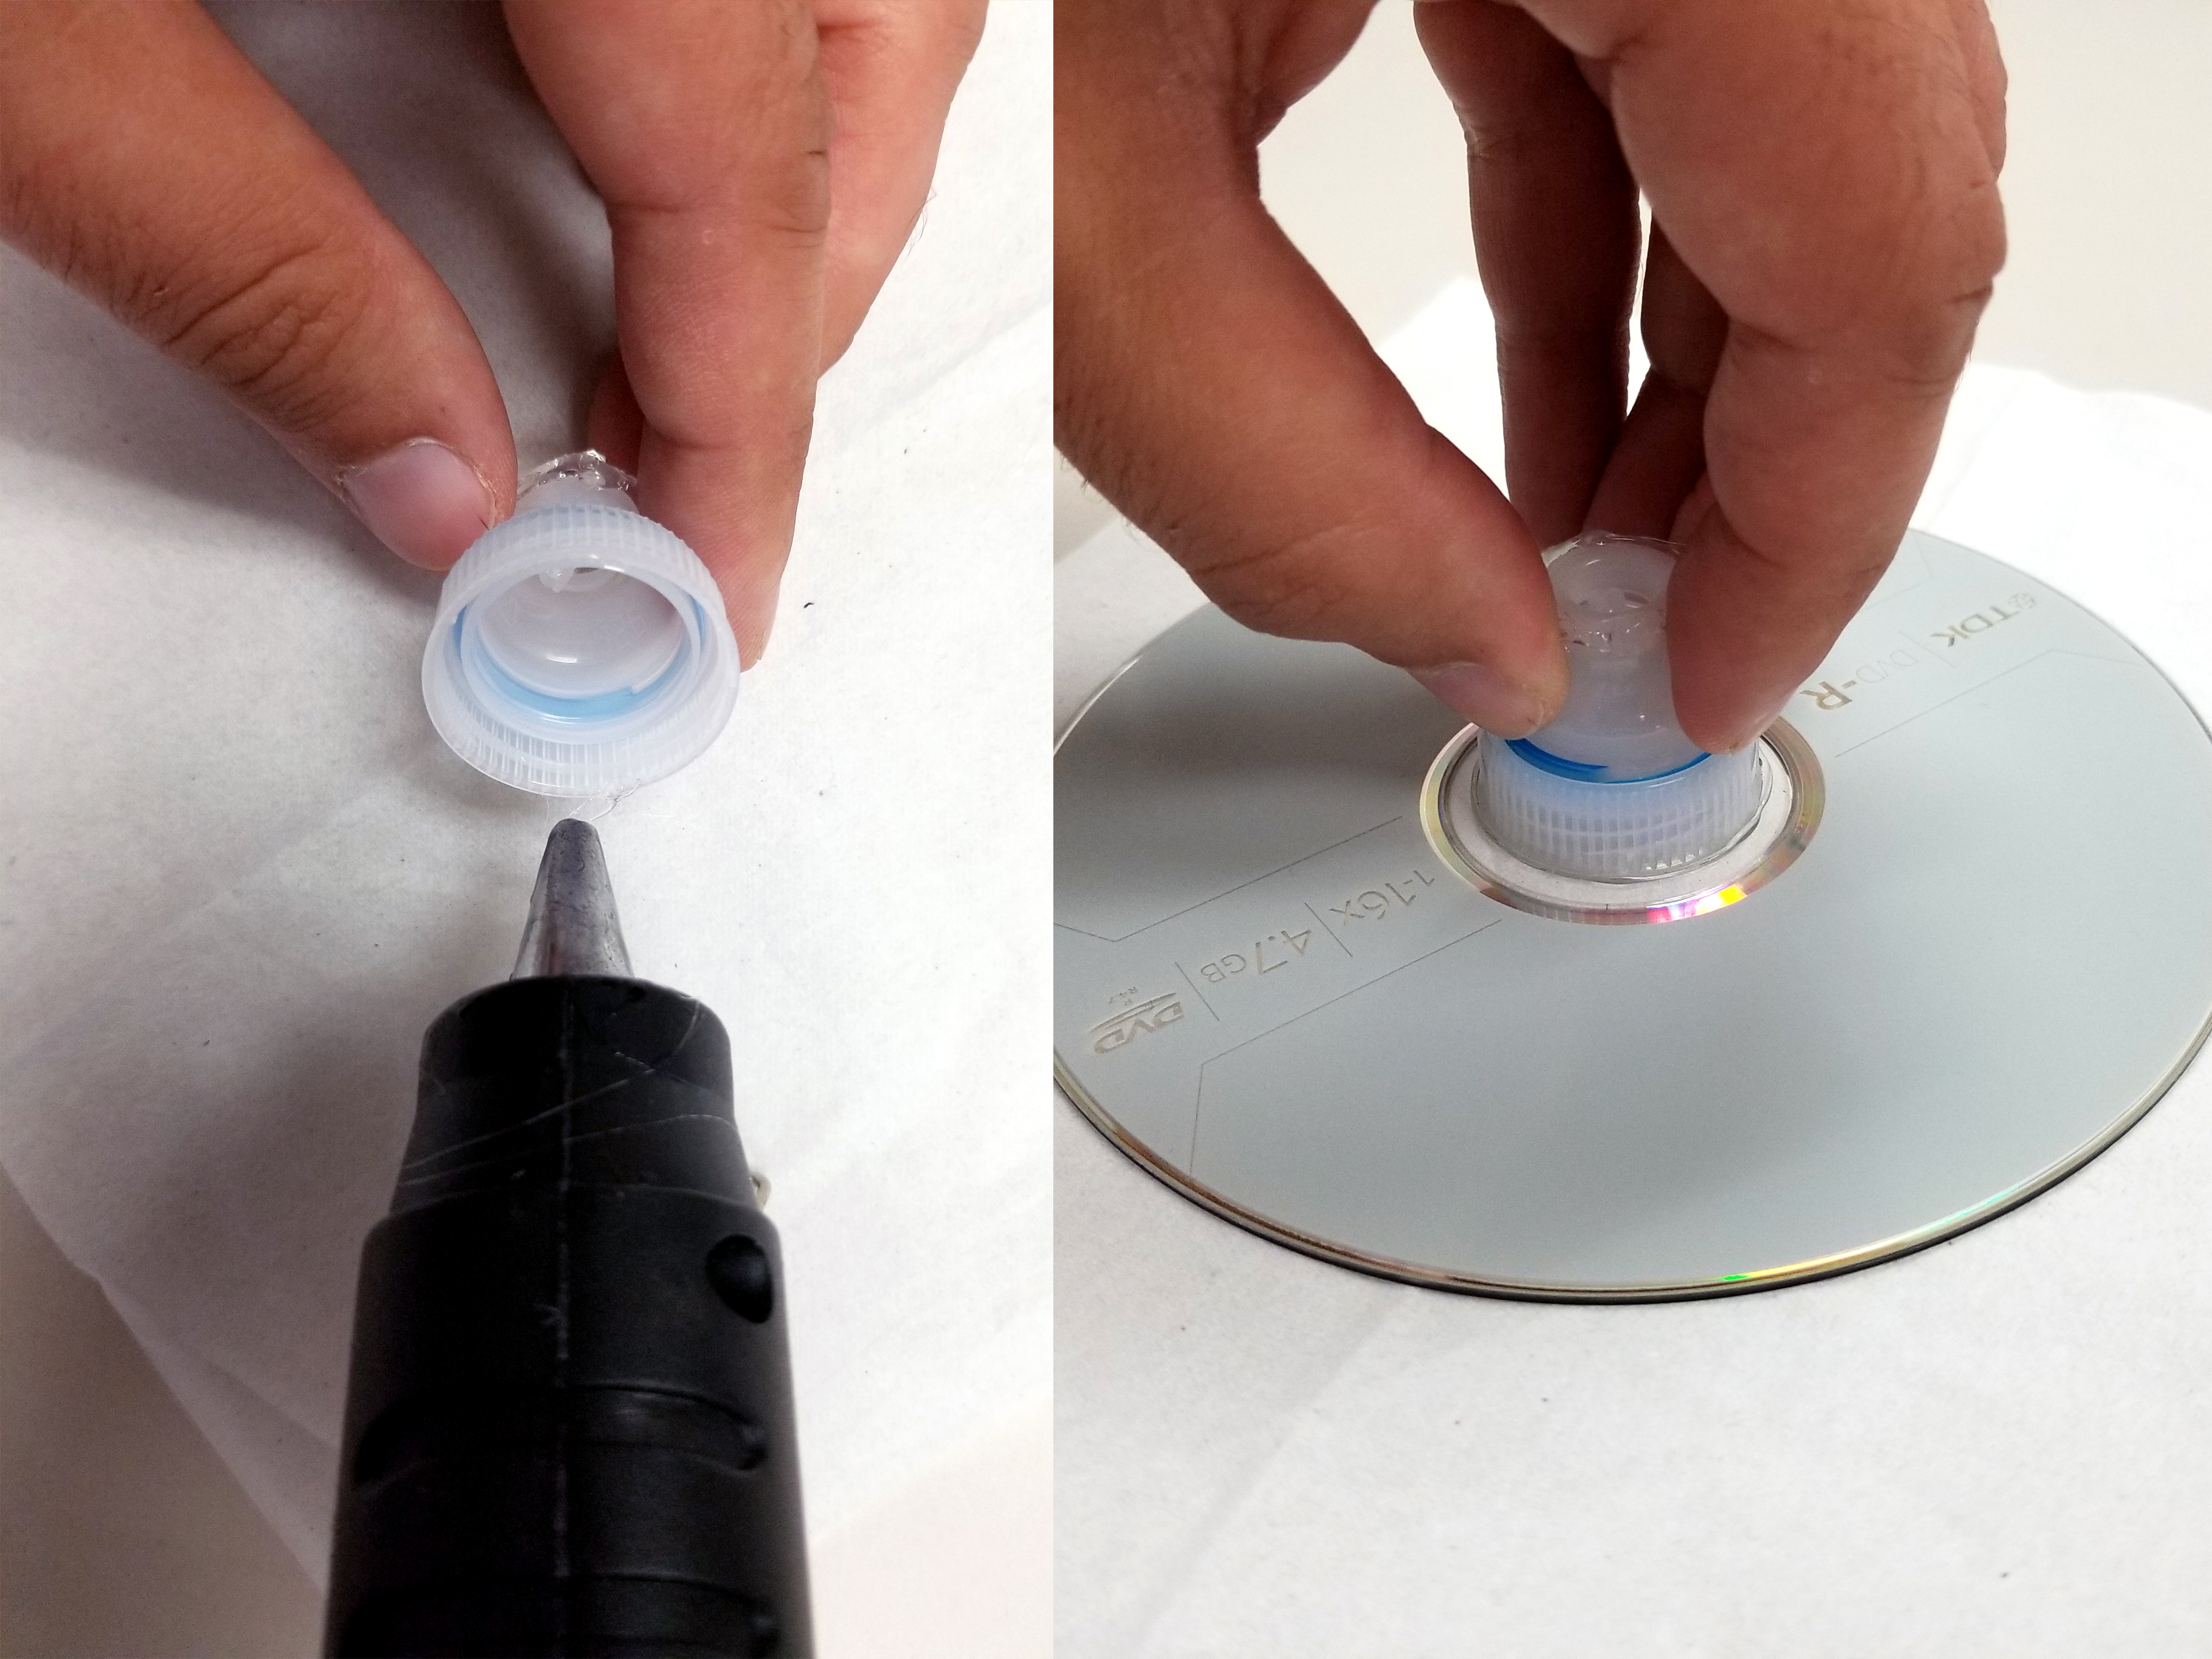 Adding glue to the bottom of the water bottle top and attaching to the CD